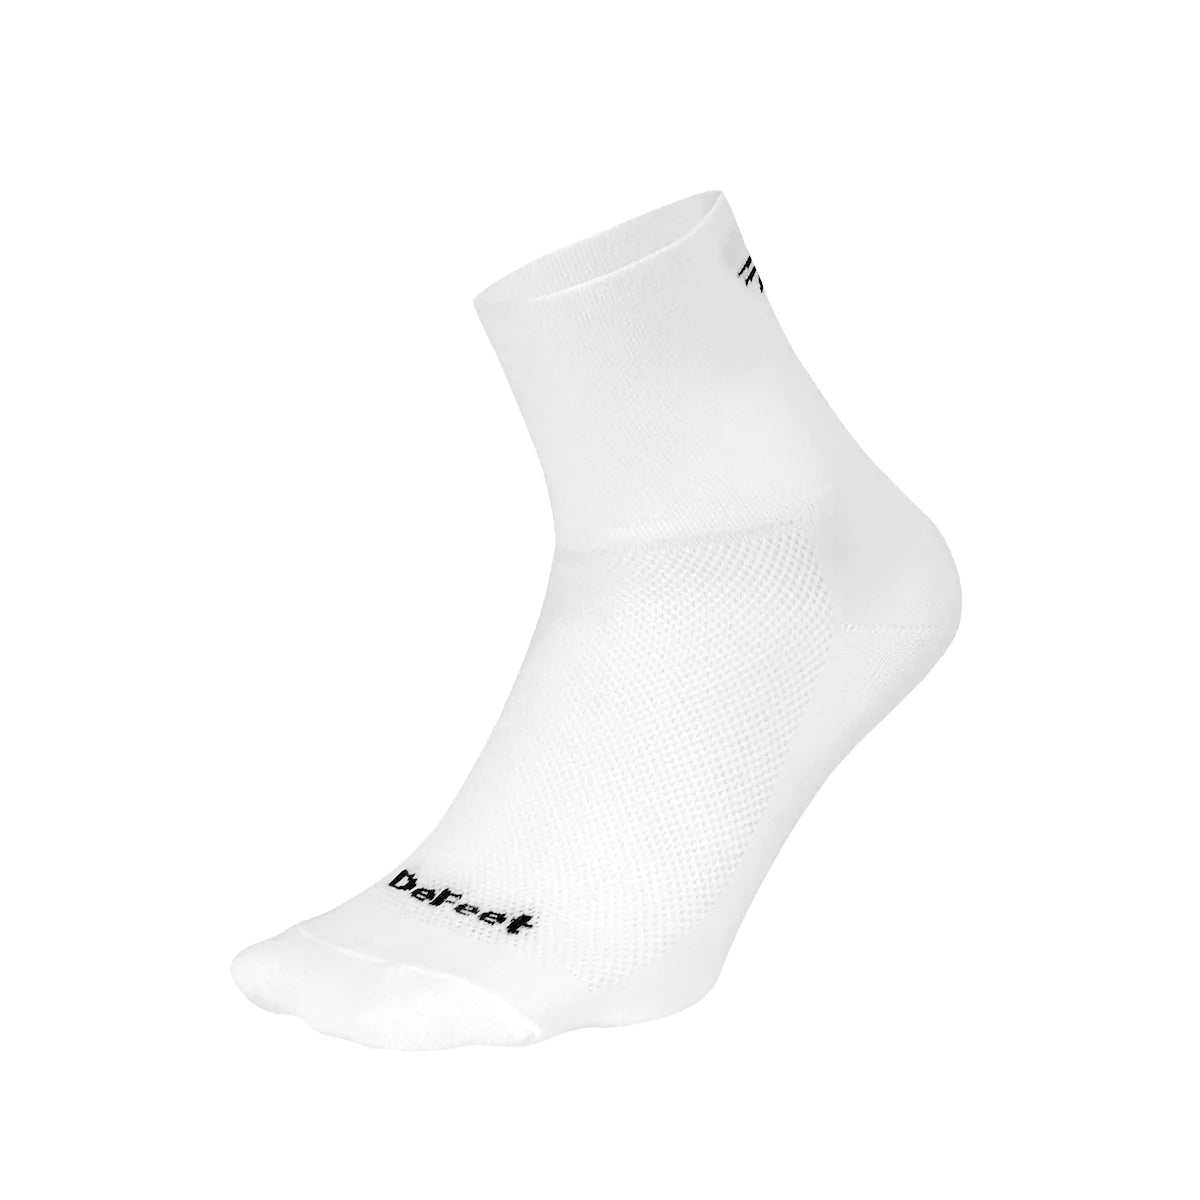 Aireator 3" cuff cycling sock in white with small black d-logo on back of cuff